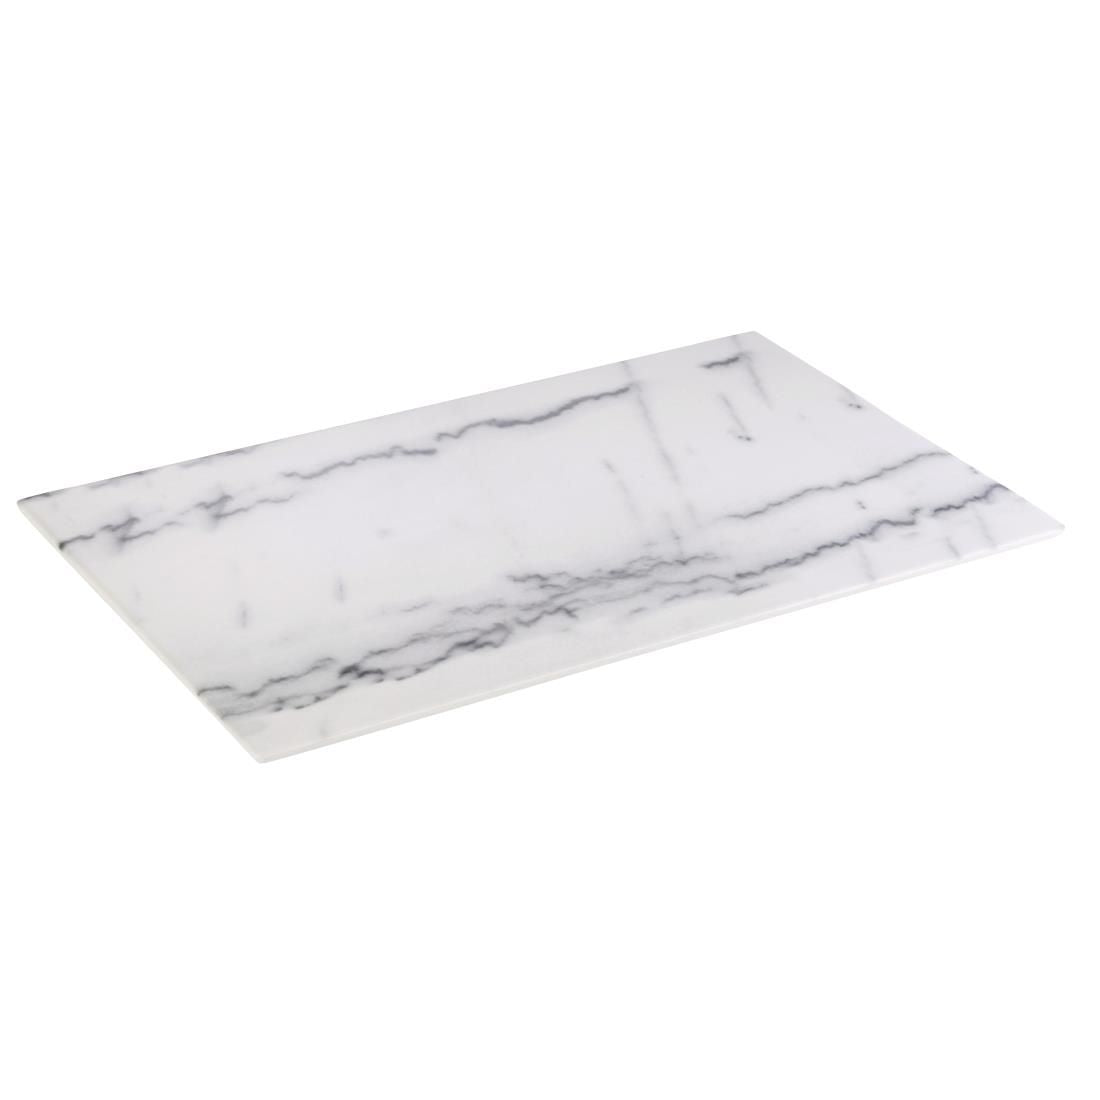 APS Melamine Tray Marble GN 1/1 JD Catering Equipment Solutions Ltd